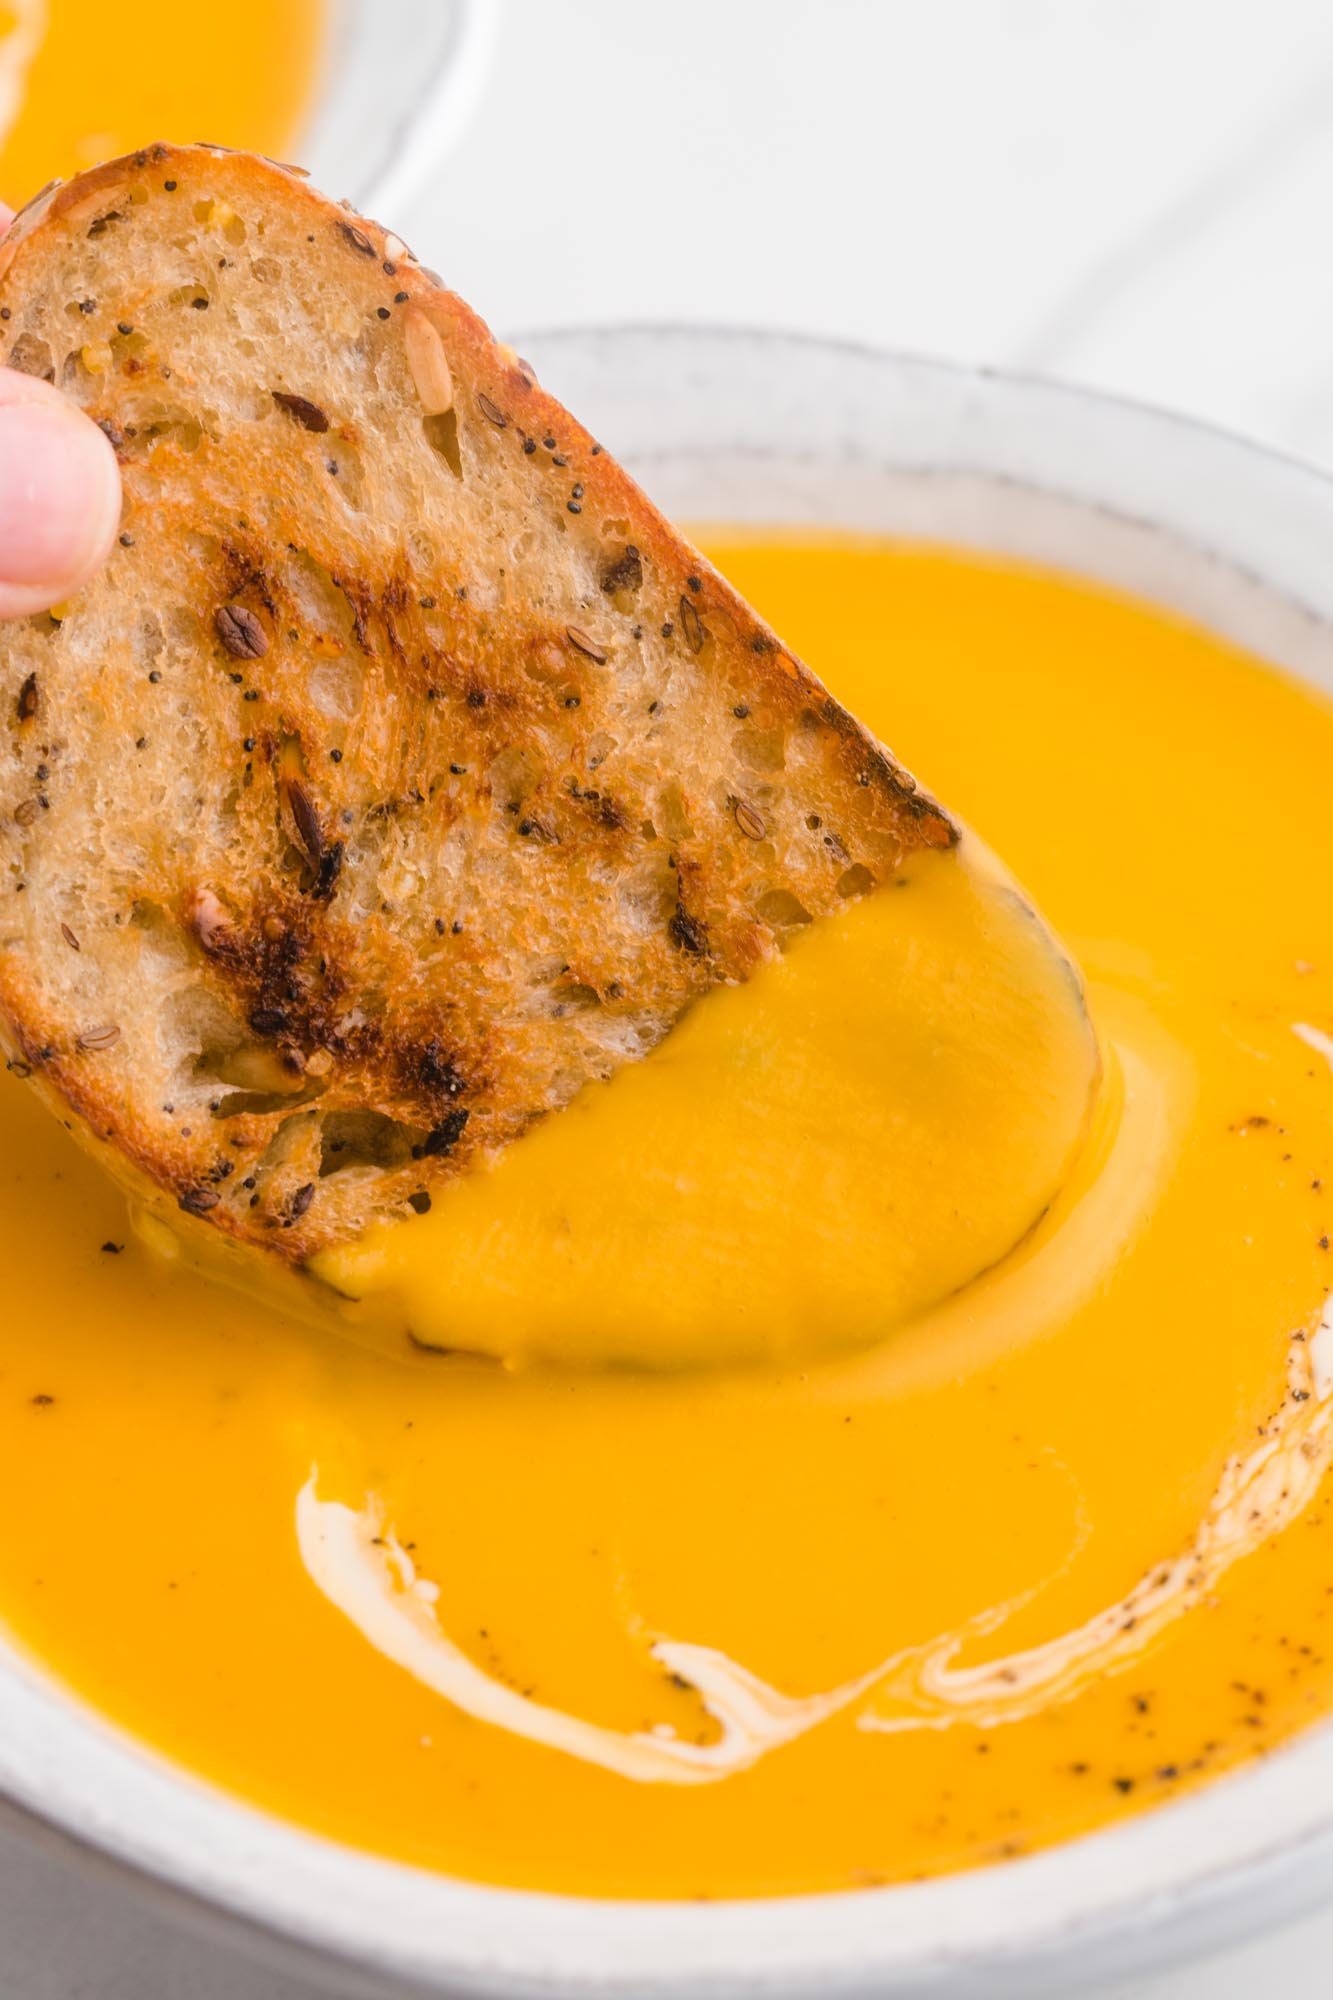 Dipping toasted bread in sweet potato soup, close up shot.